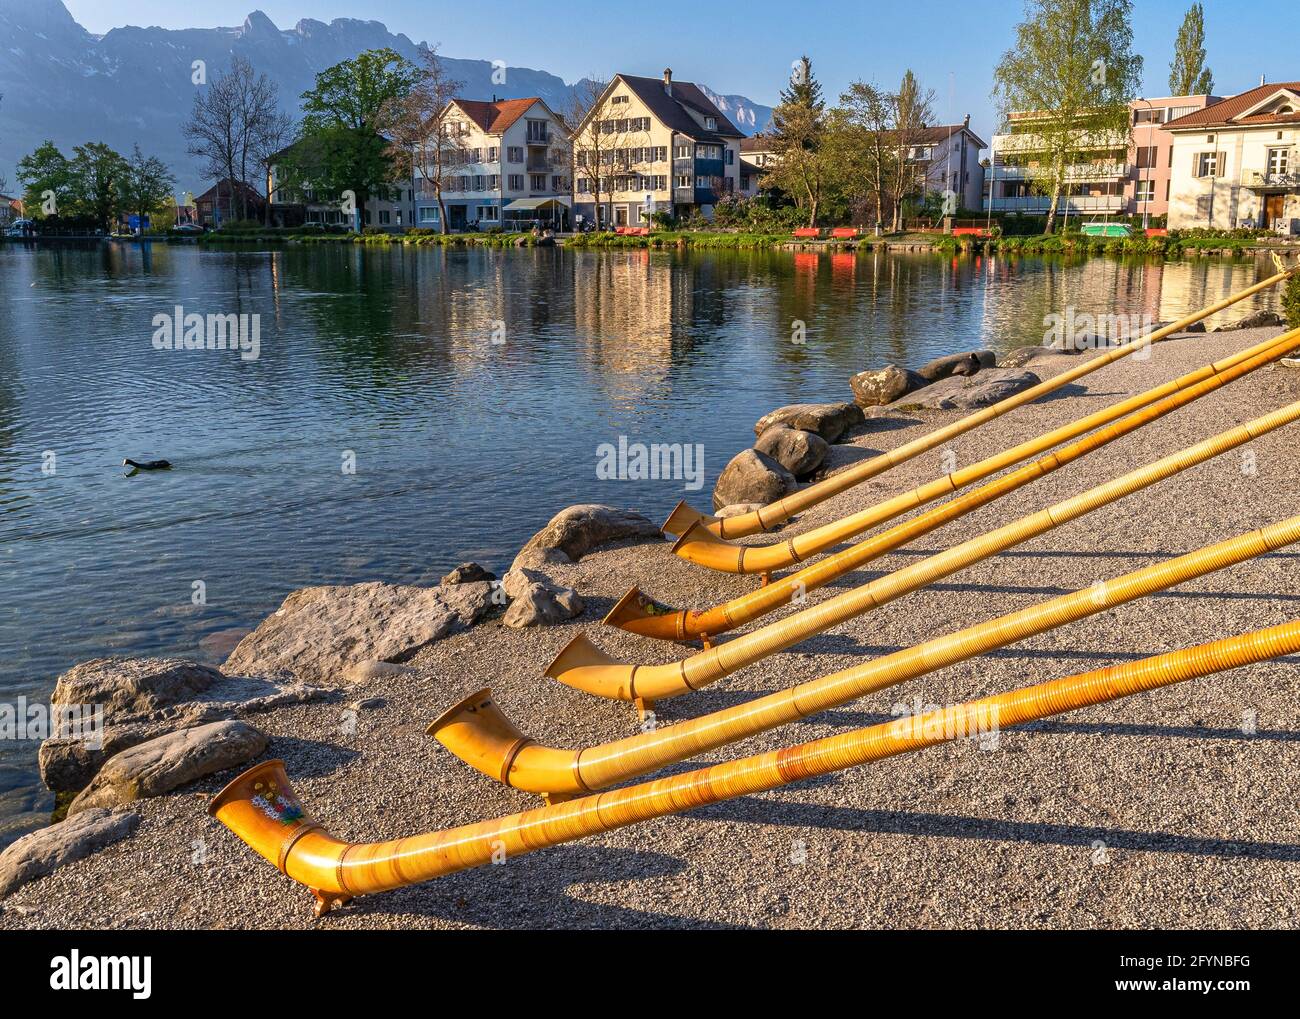 The musical instrument alphorn or alpenhorn or alpine horn is a labrophone, consisting of a straight several meter long wooden natural horn of conical Stock Photo